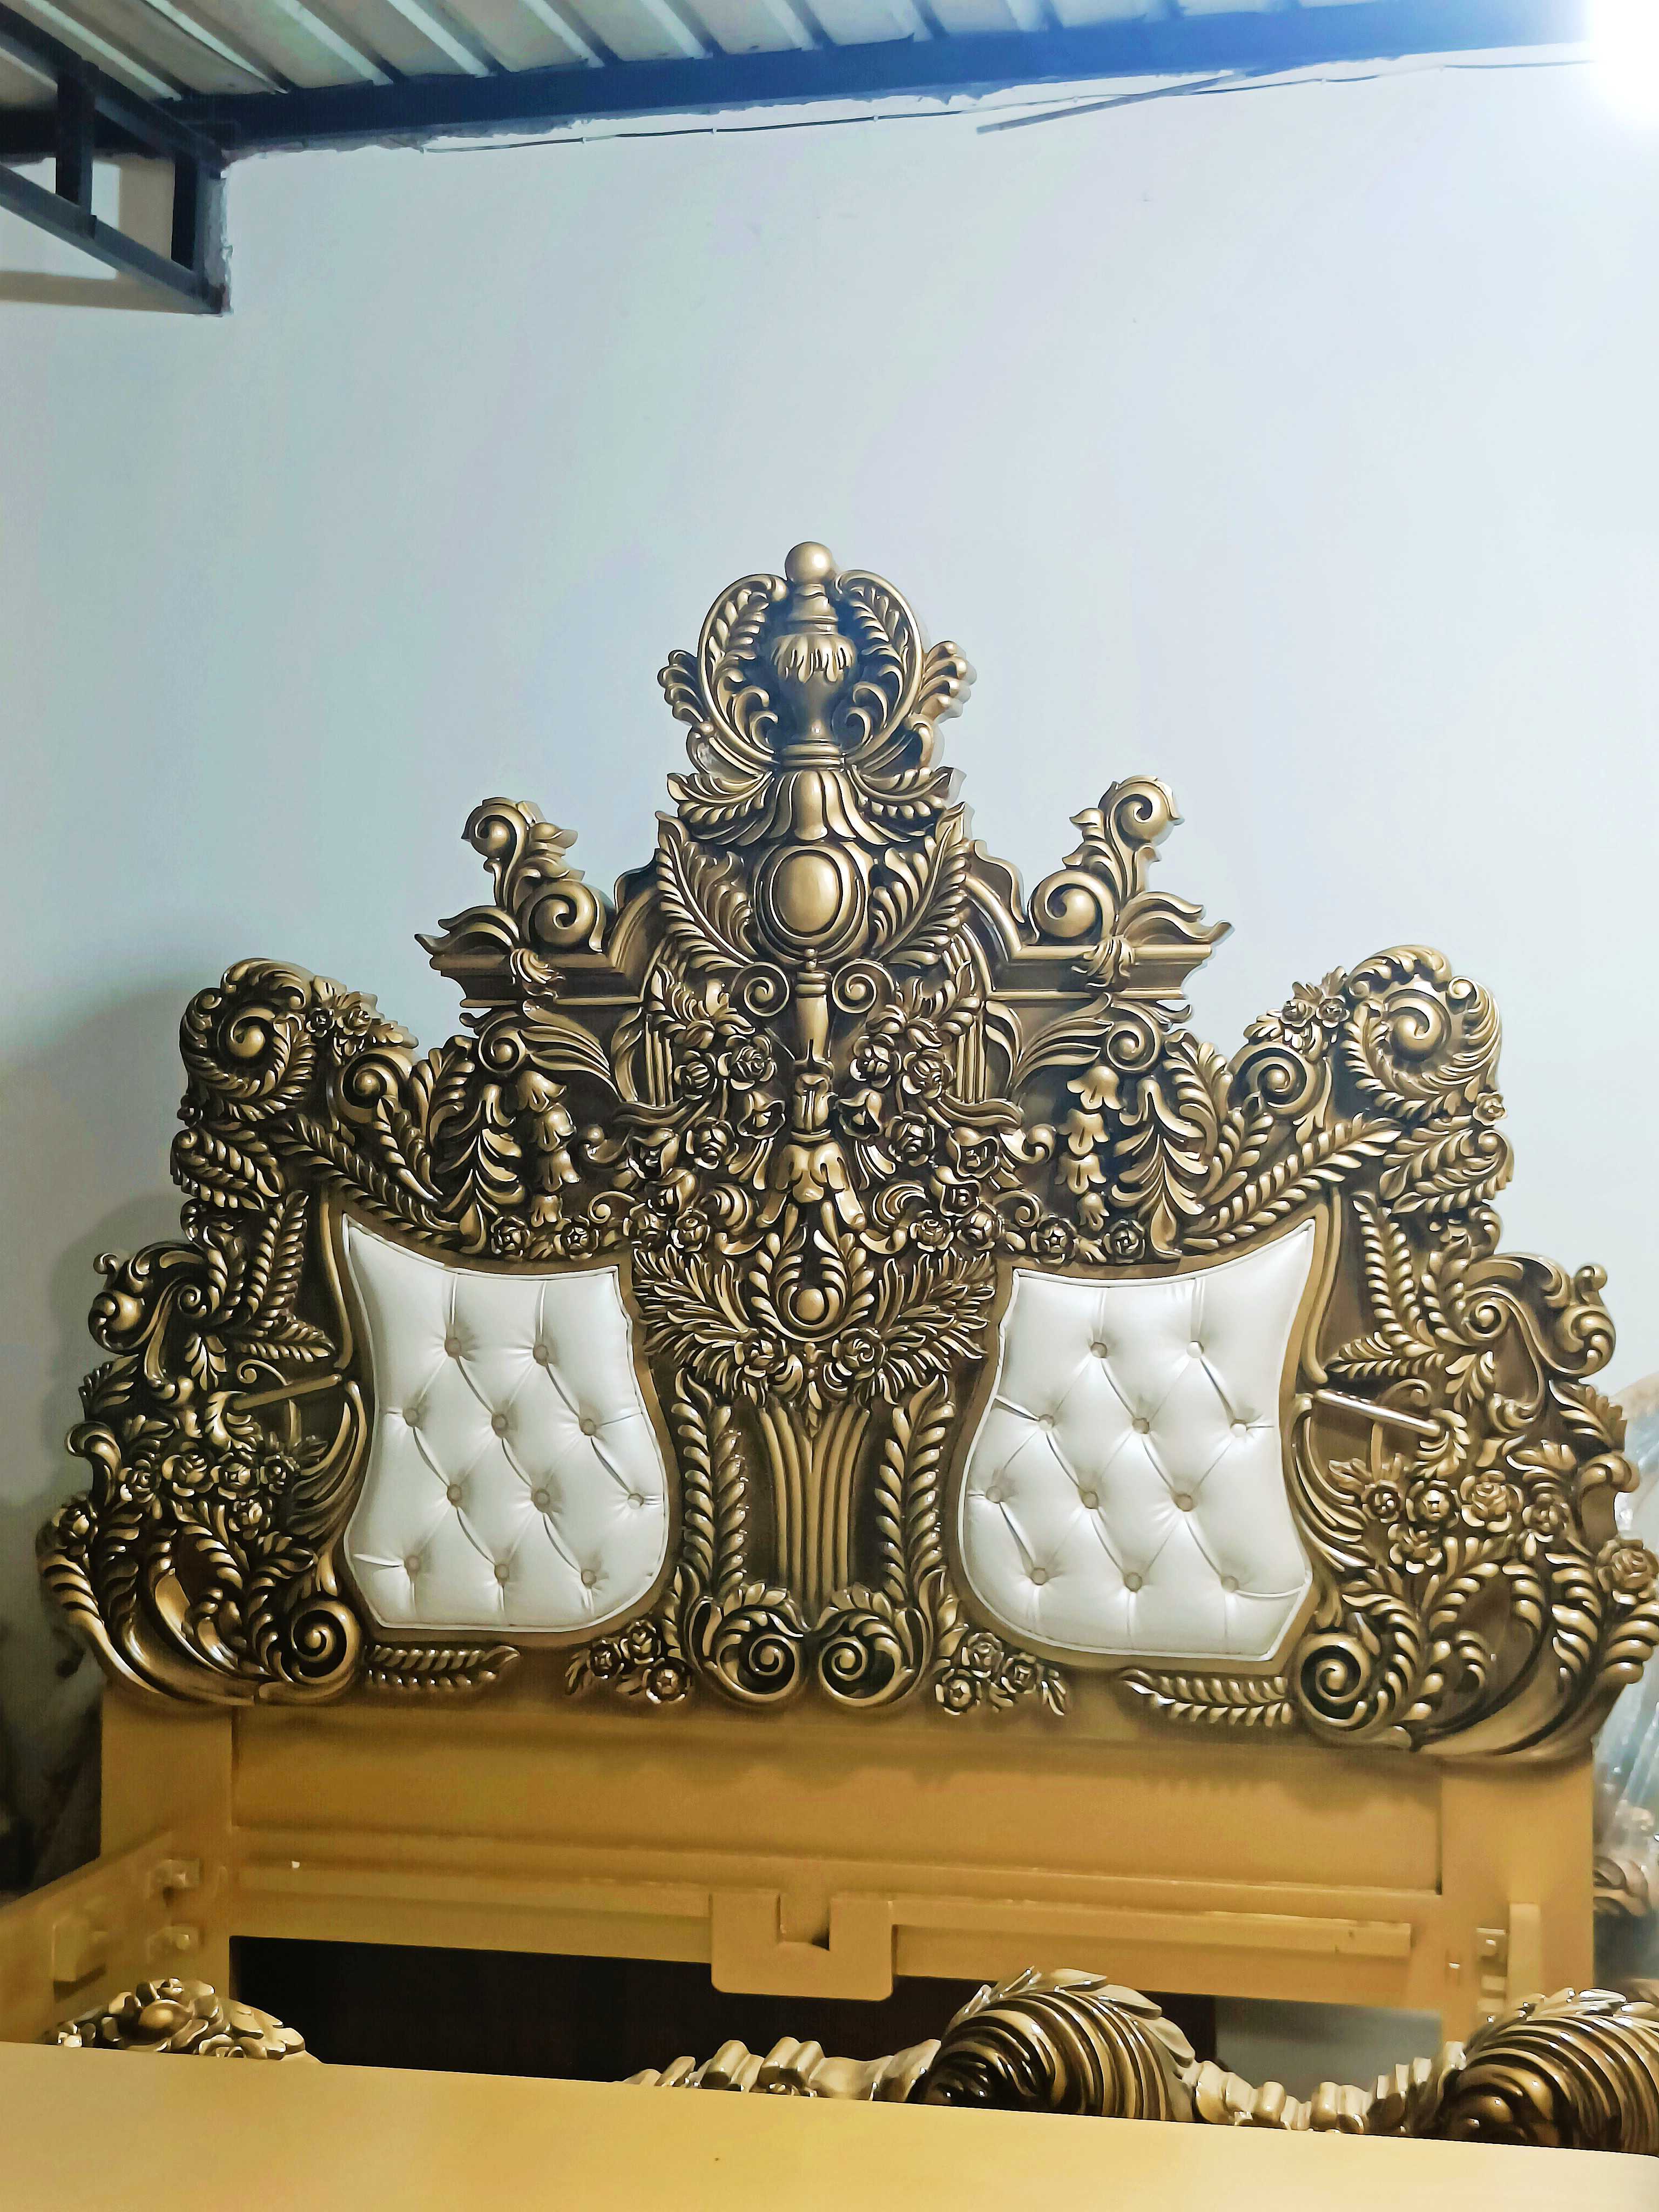 Royal bed Handcrafted maharaja Design made of premium Quality teak Wood - Baroque Style Carving with metallic Gold color and White Tufted Leather - Carved in India Brand Royalzig Luxury Furniture 